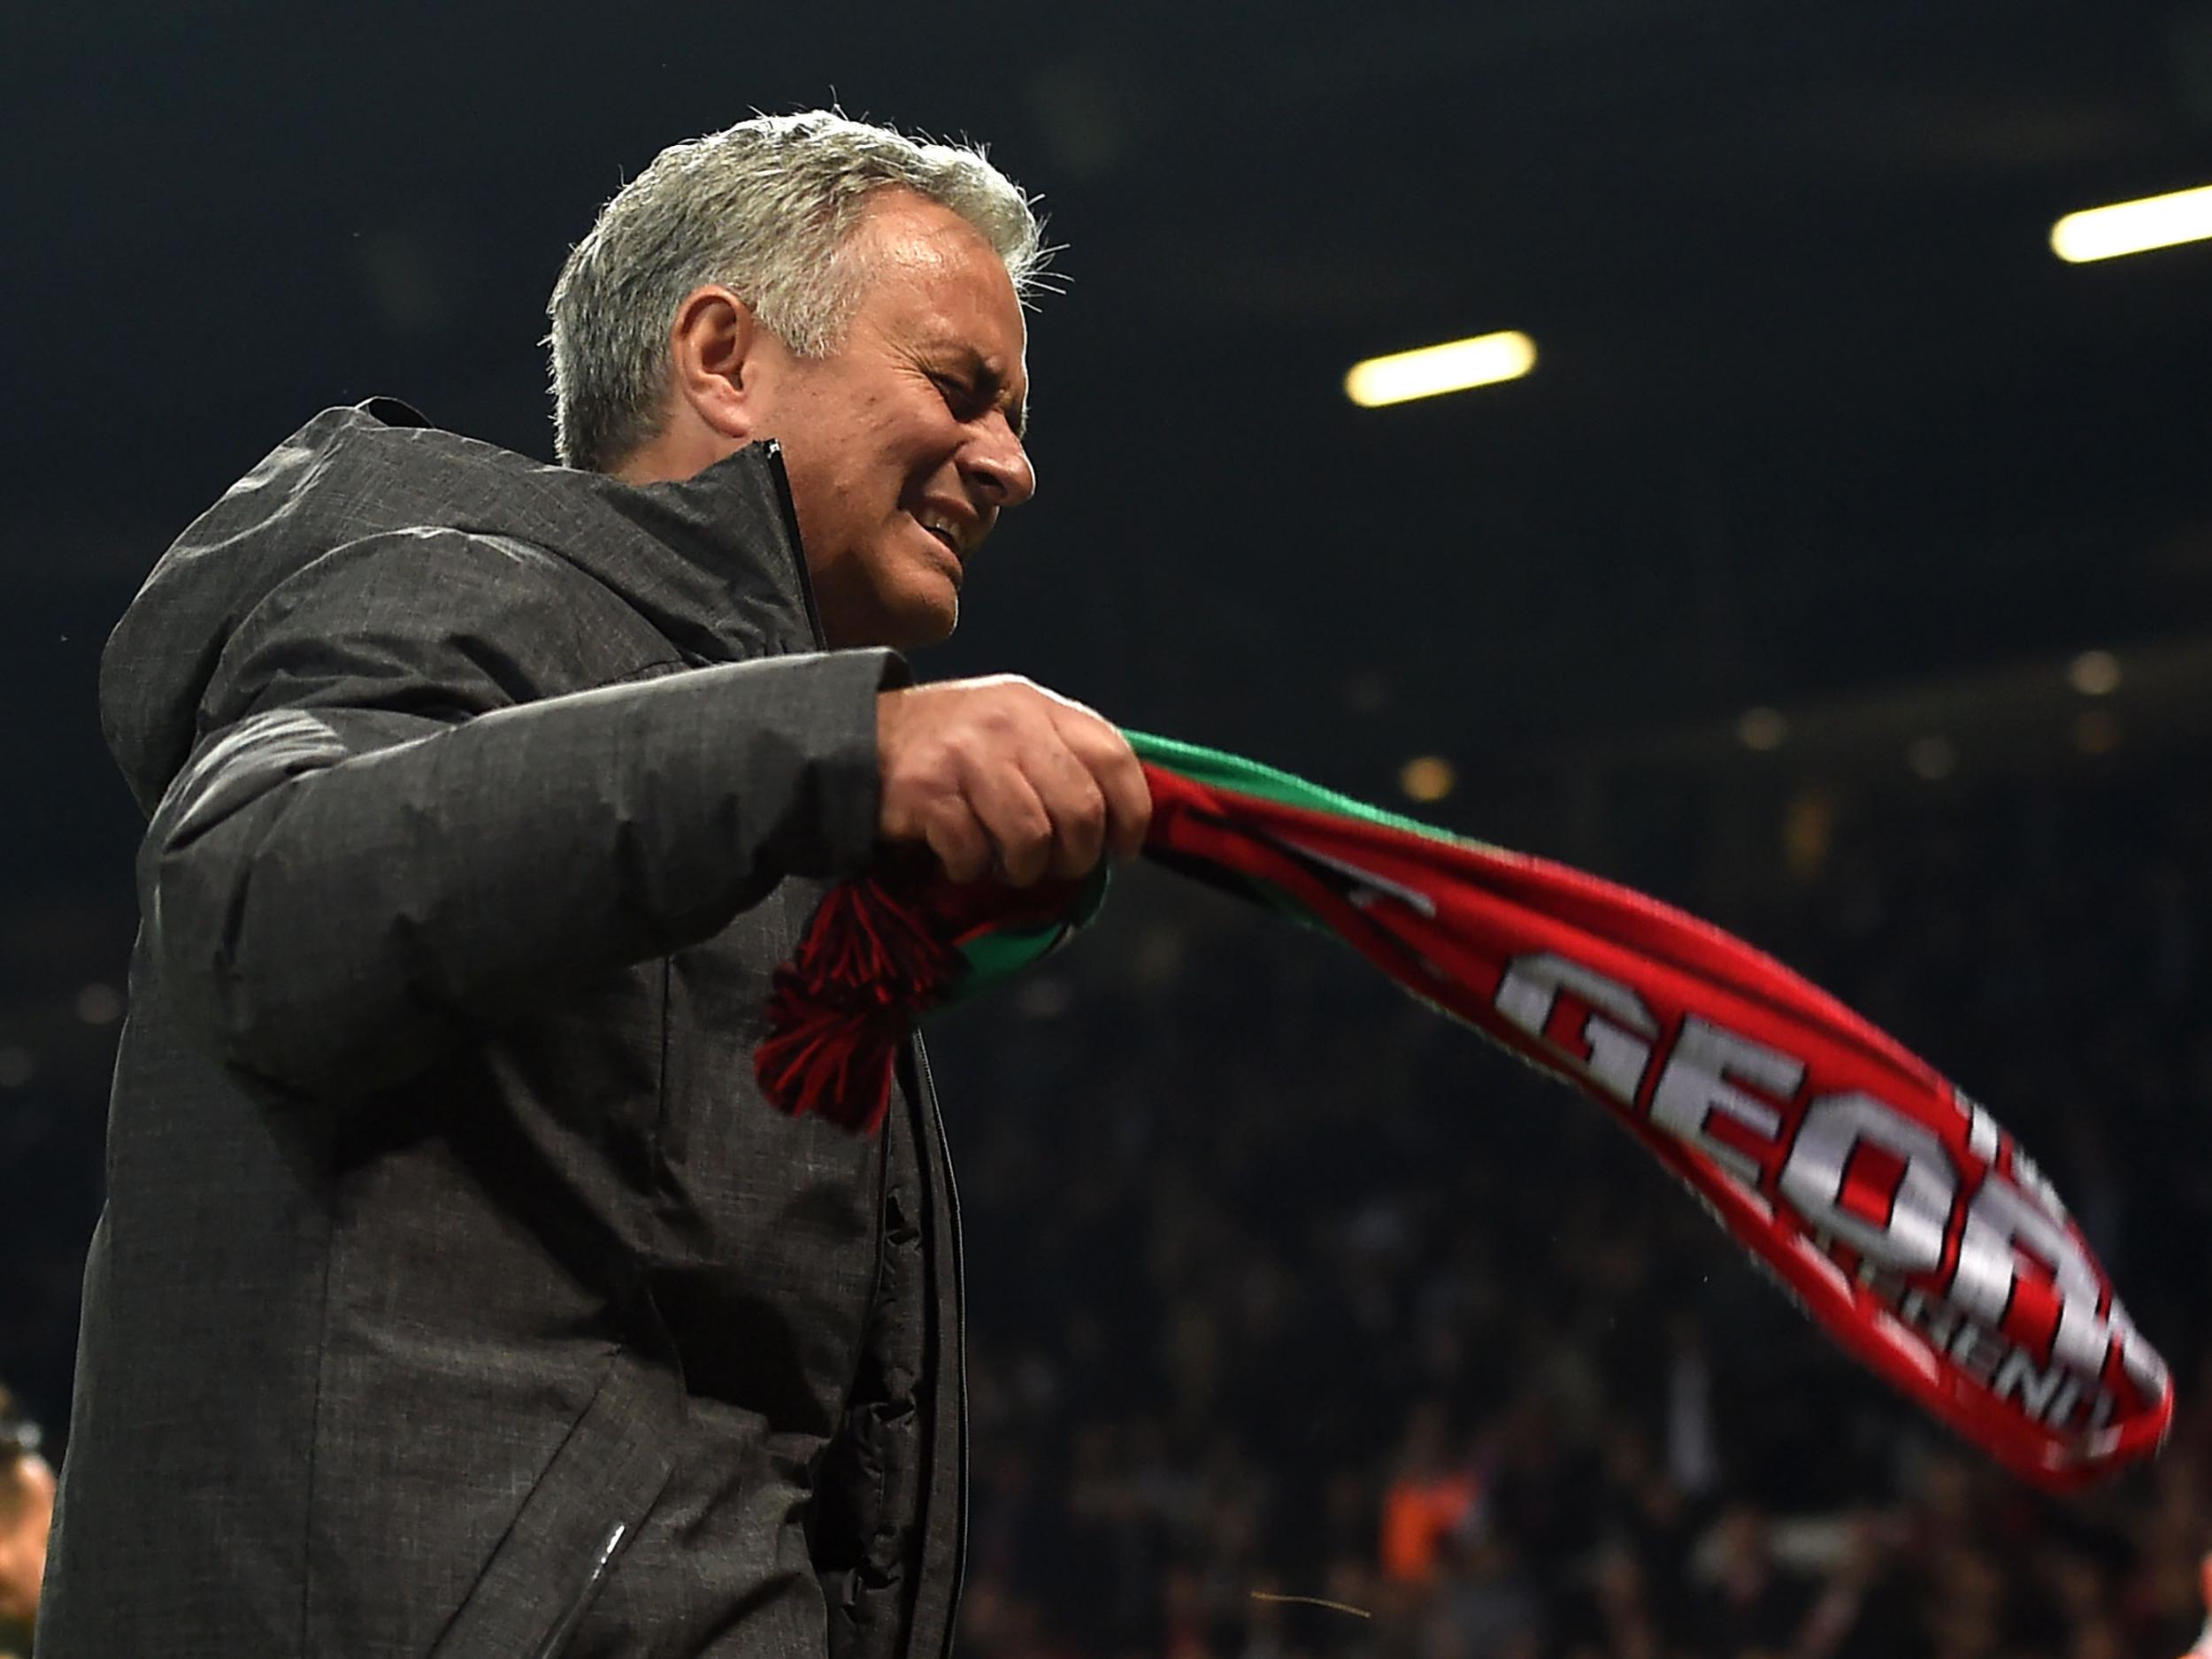 Mourinho swang a scarf around in jubilation at the end of the game